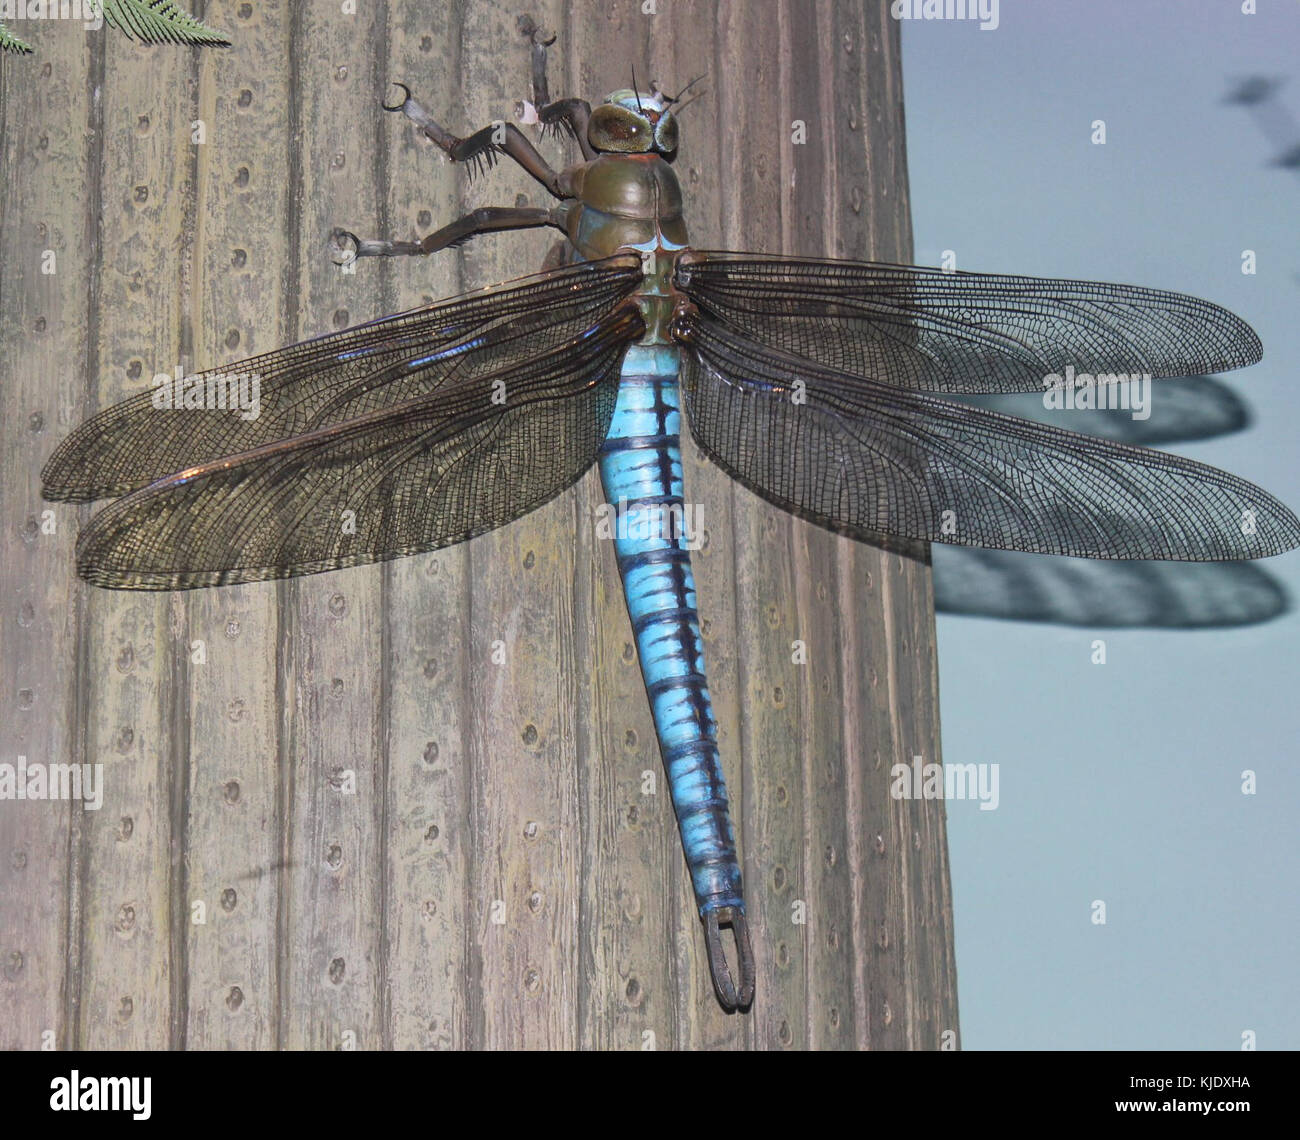 Gfp giant dragonfly meganeura Stock Photo